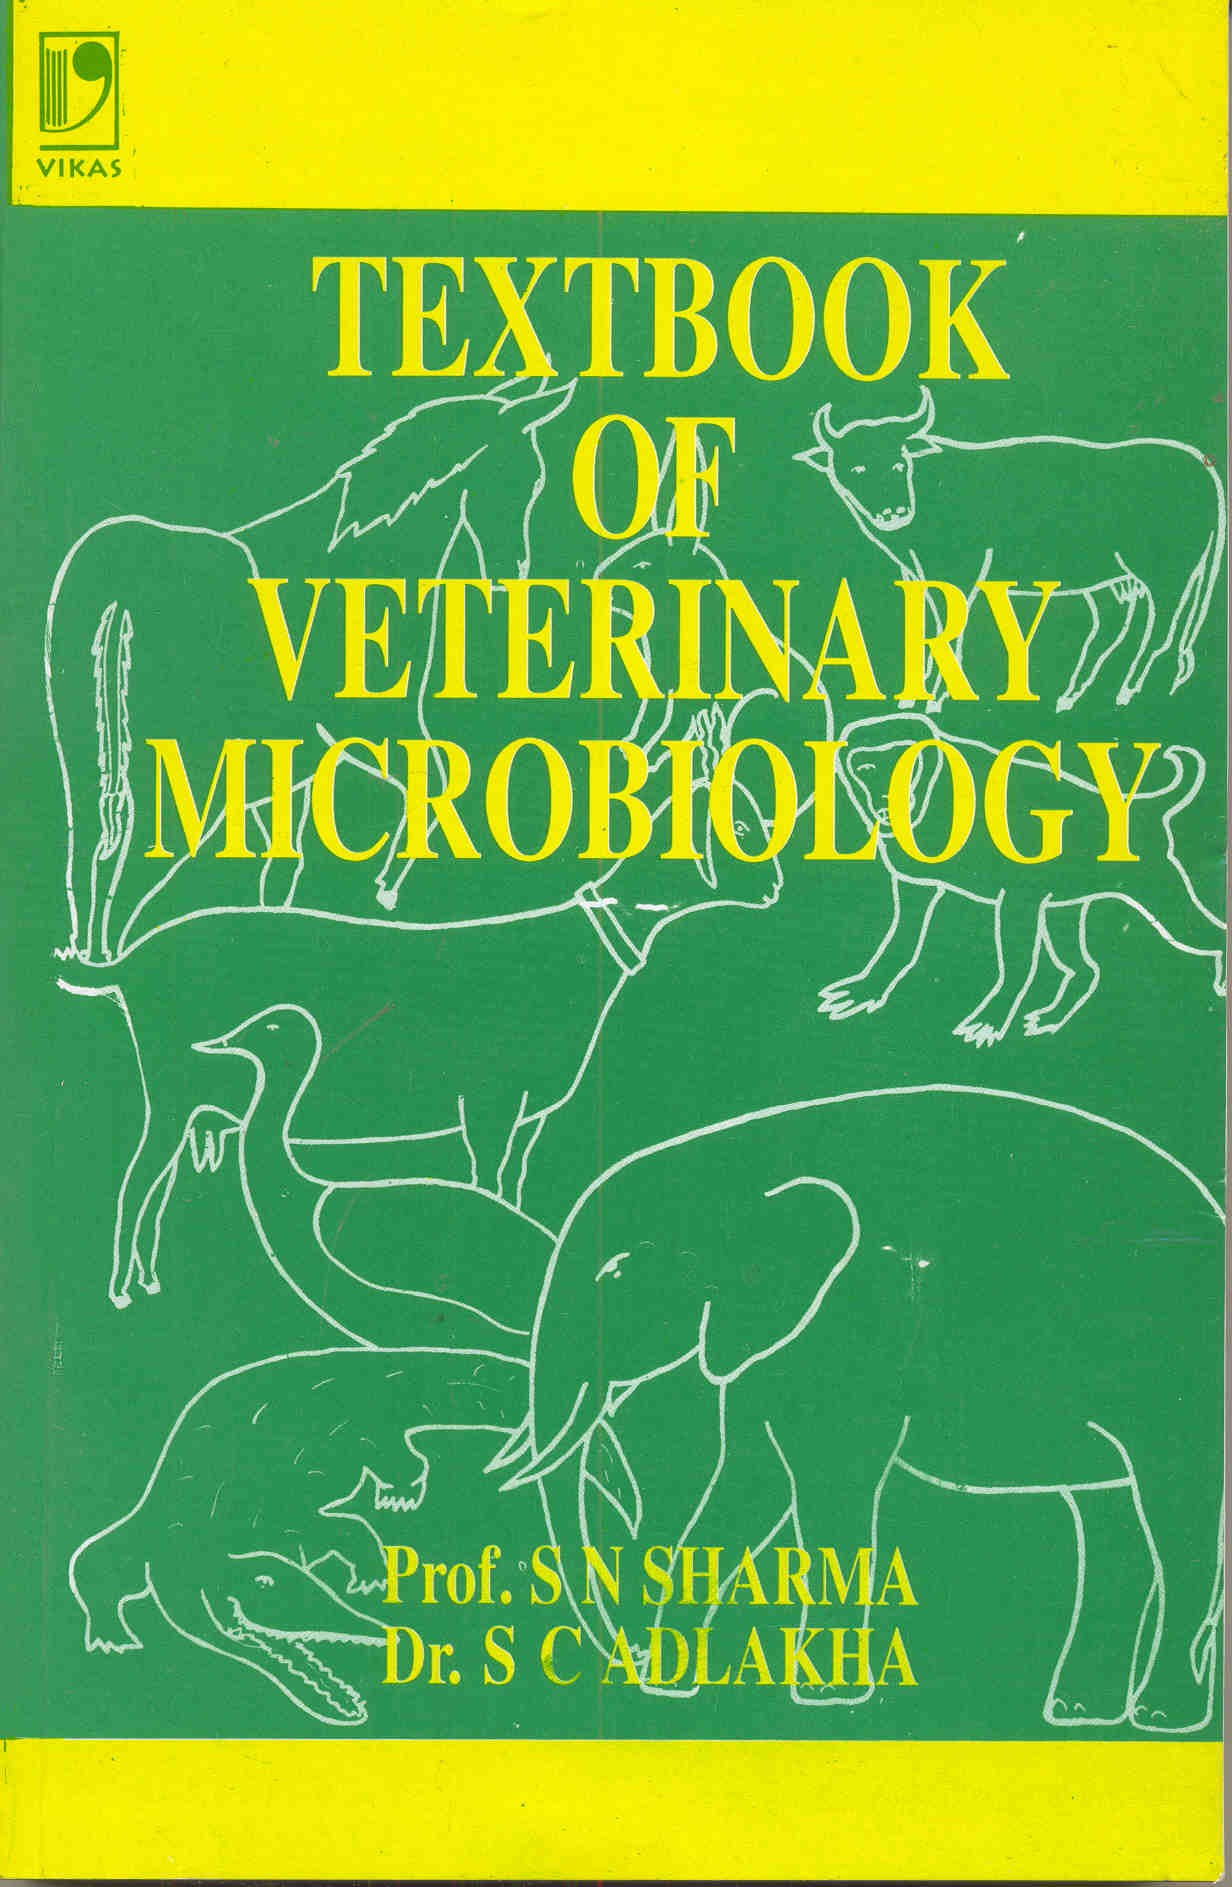 TEXTBOOK OF VETERINARY MICROBIOLOGY By S N SHARMA